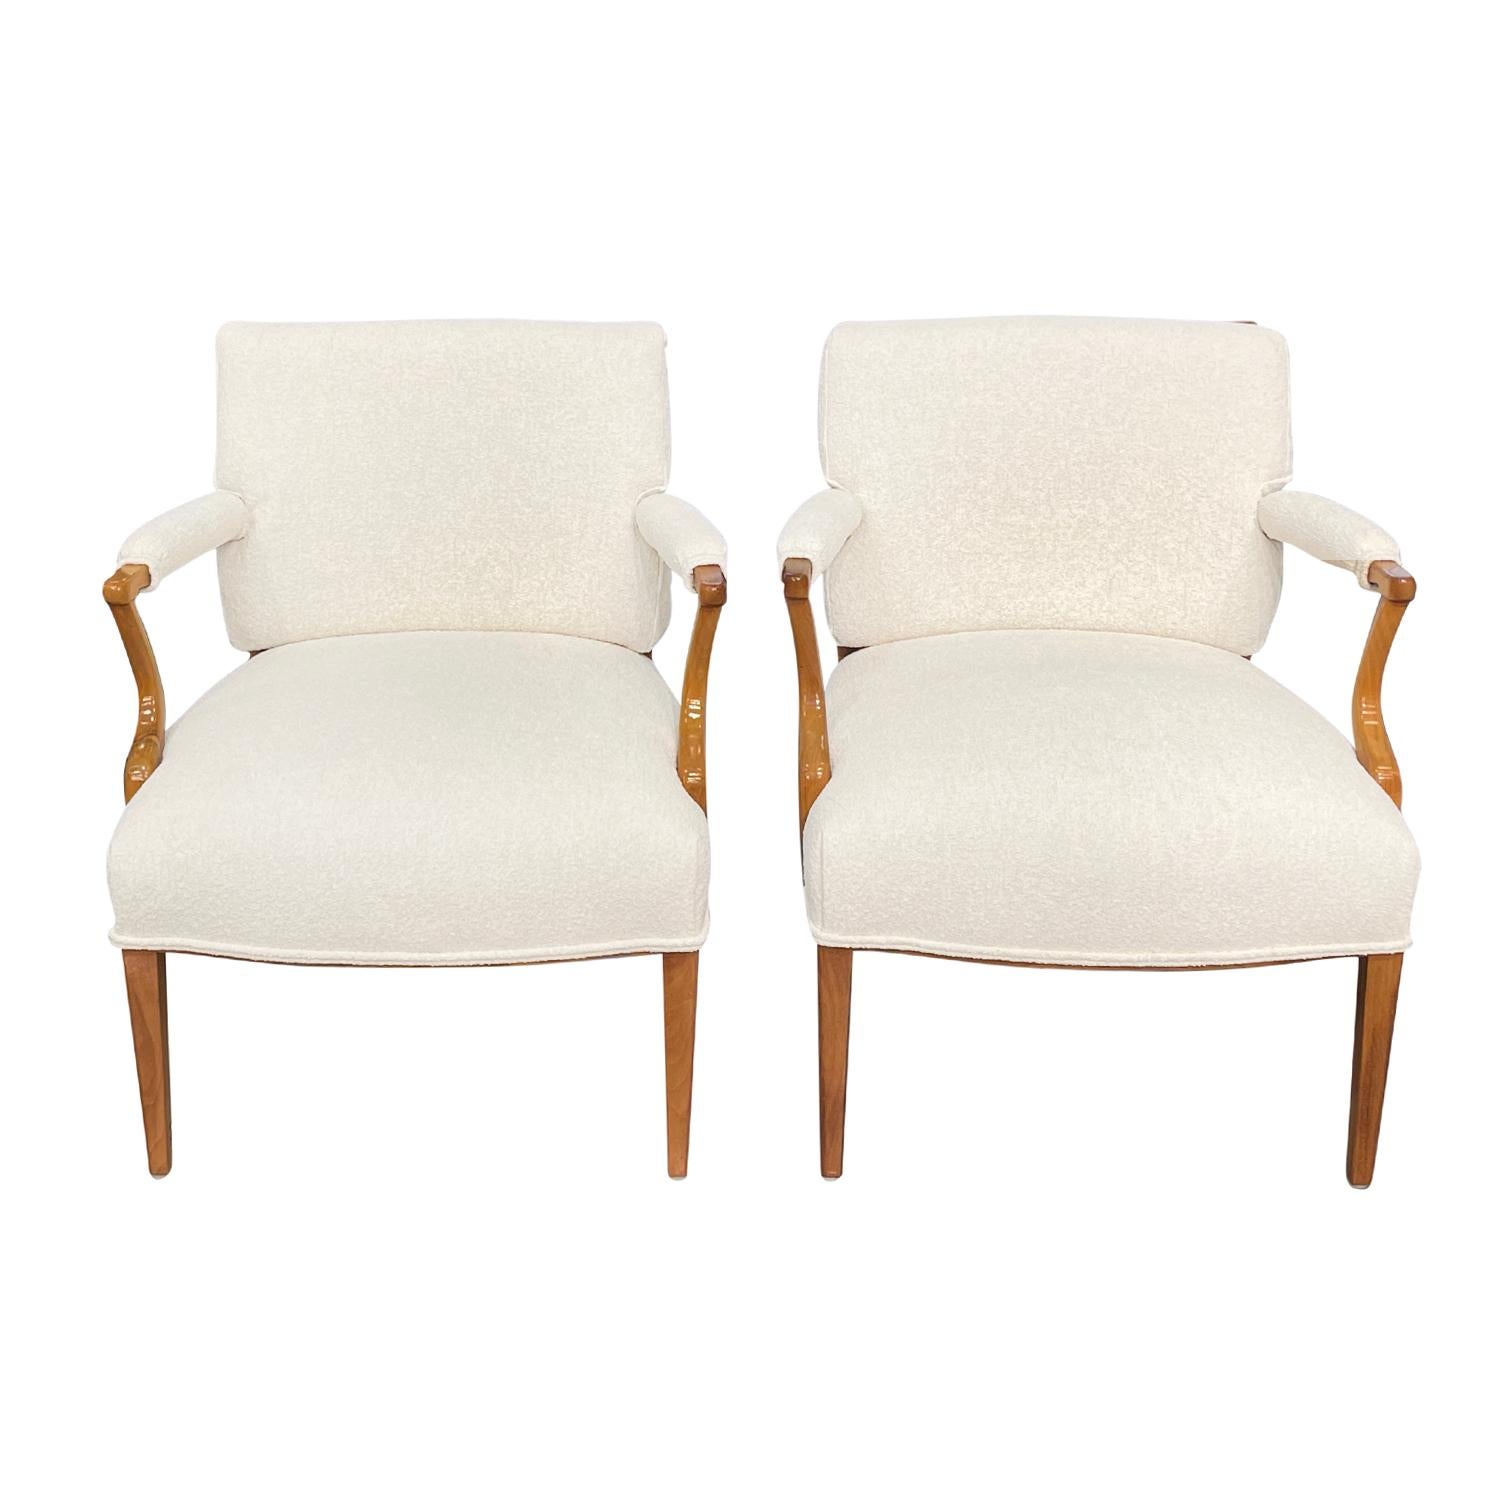 A vintage Swedish Art Deco pair of armchairs made of hand crafted polished Beechwood, designed by Josef Frank for Svenskt Tenn in good condition. The set of two Scandinavian dining room chairs have a slightly reclined backrest which is enhanced by a